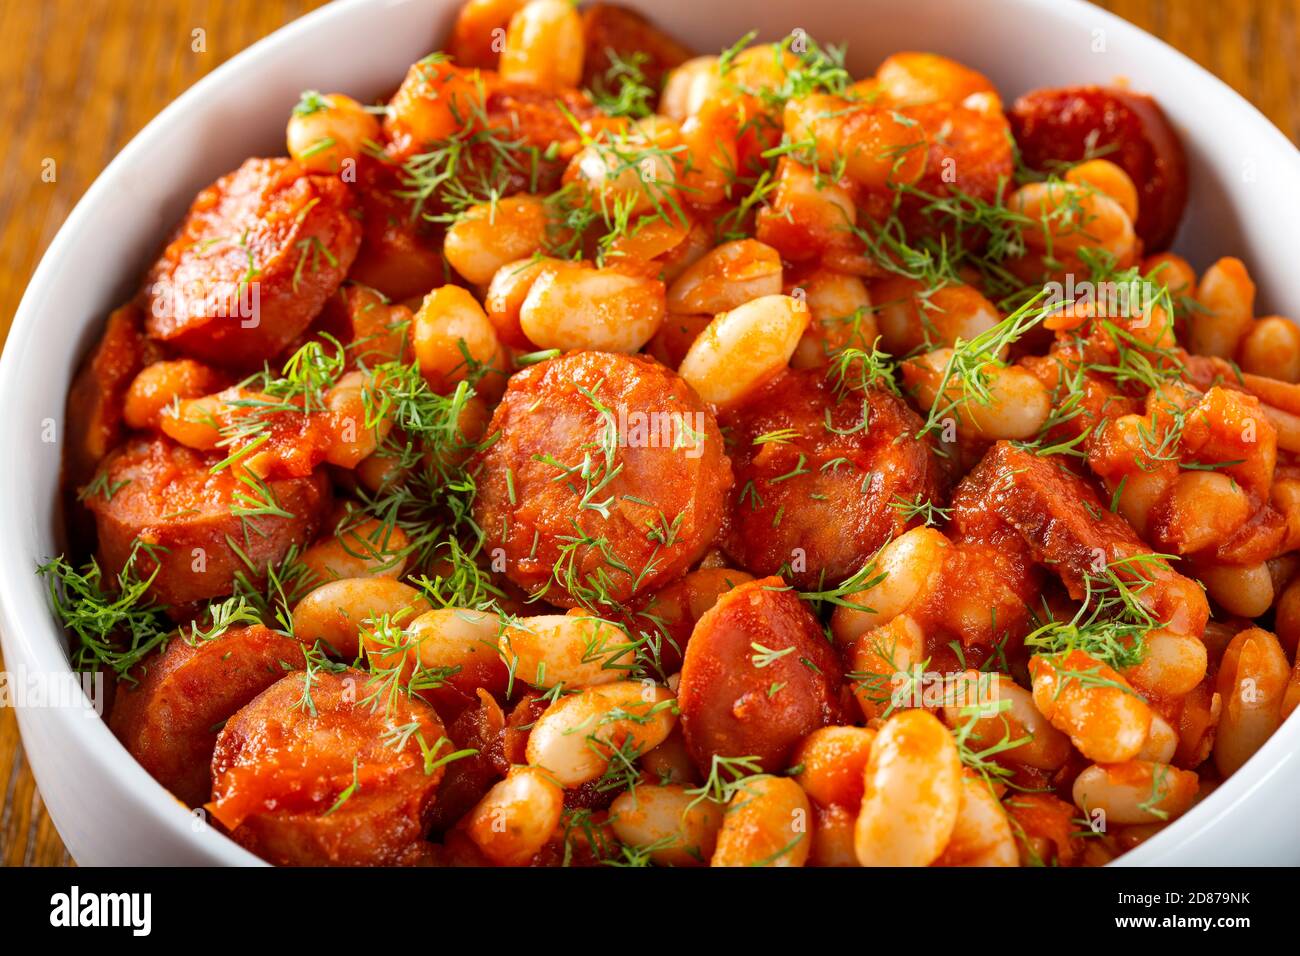 Beans stew with pork sausages and herbs Stock Photo